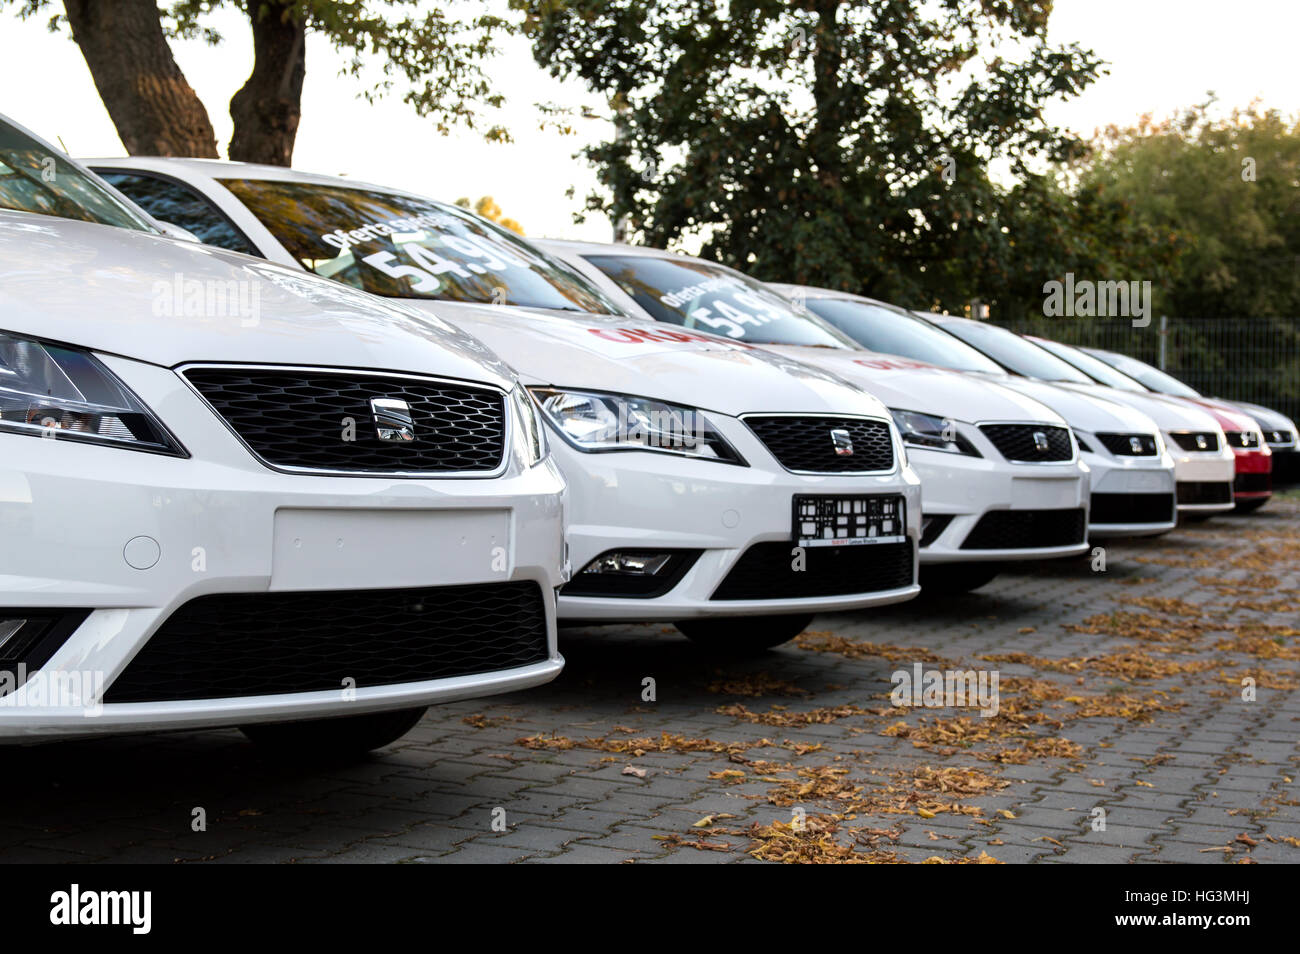 WROCLAW, POLAND- SEPTEMBER 17th, 2016: Several Seat cars stands on dealer parking i Wroclaw.  SEAT is a Spanish automobile manufacturer with its head Stock Photo